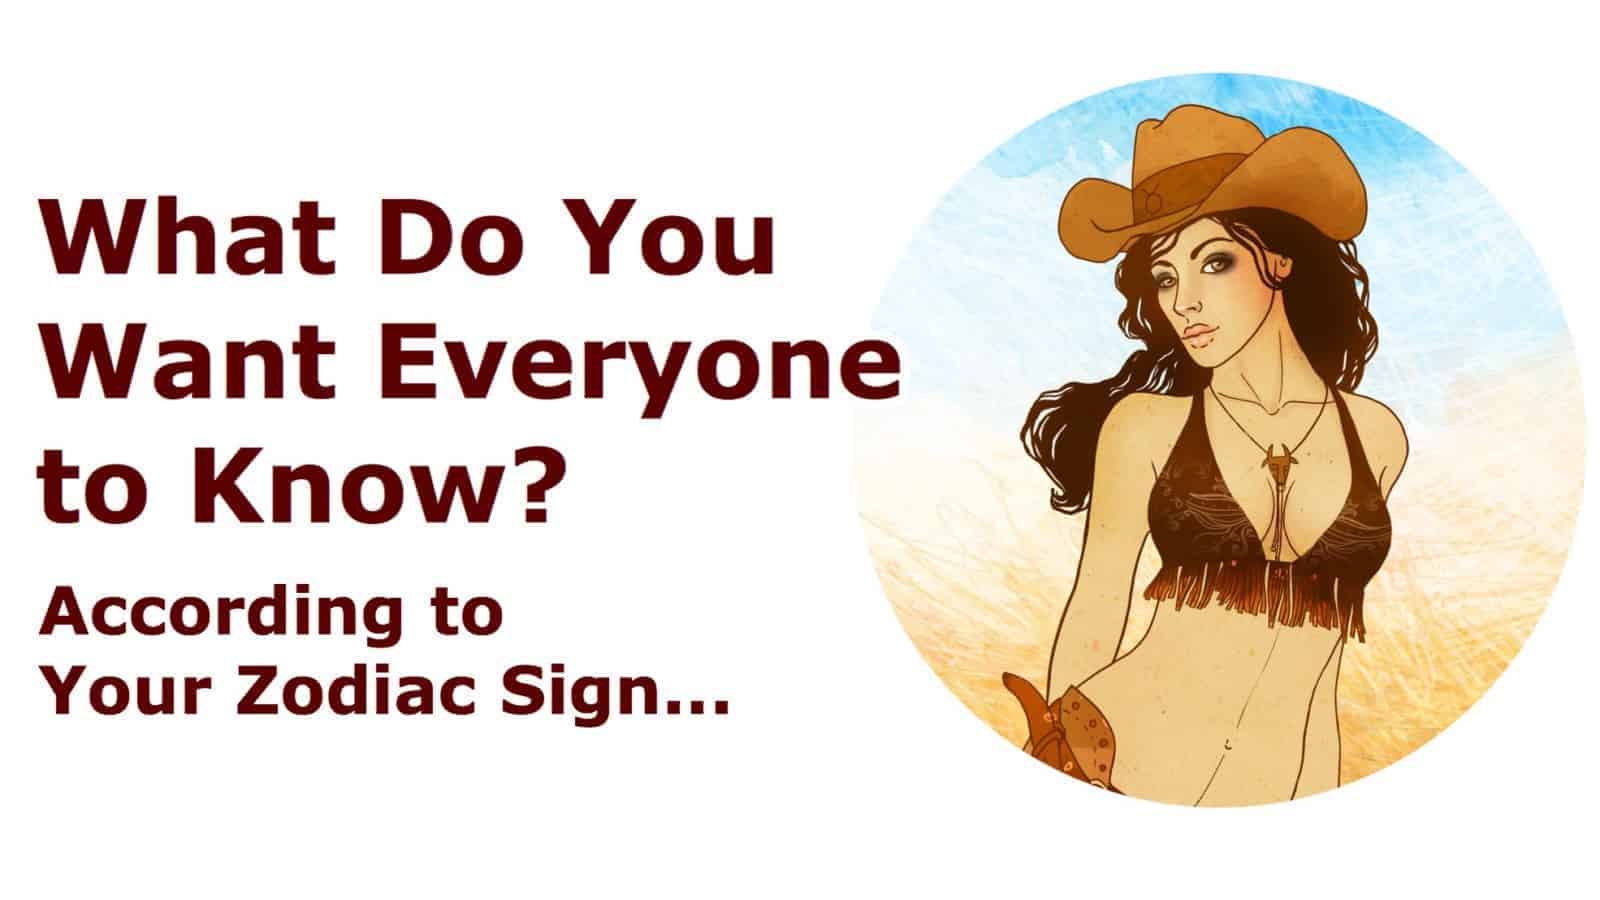 What Do You Want Everyone To Know, According To Your Zodiac Sign?